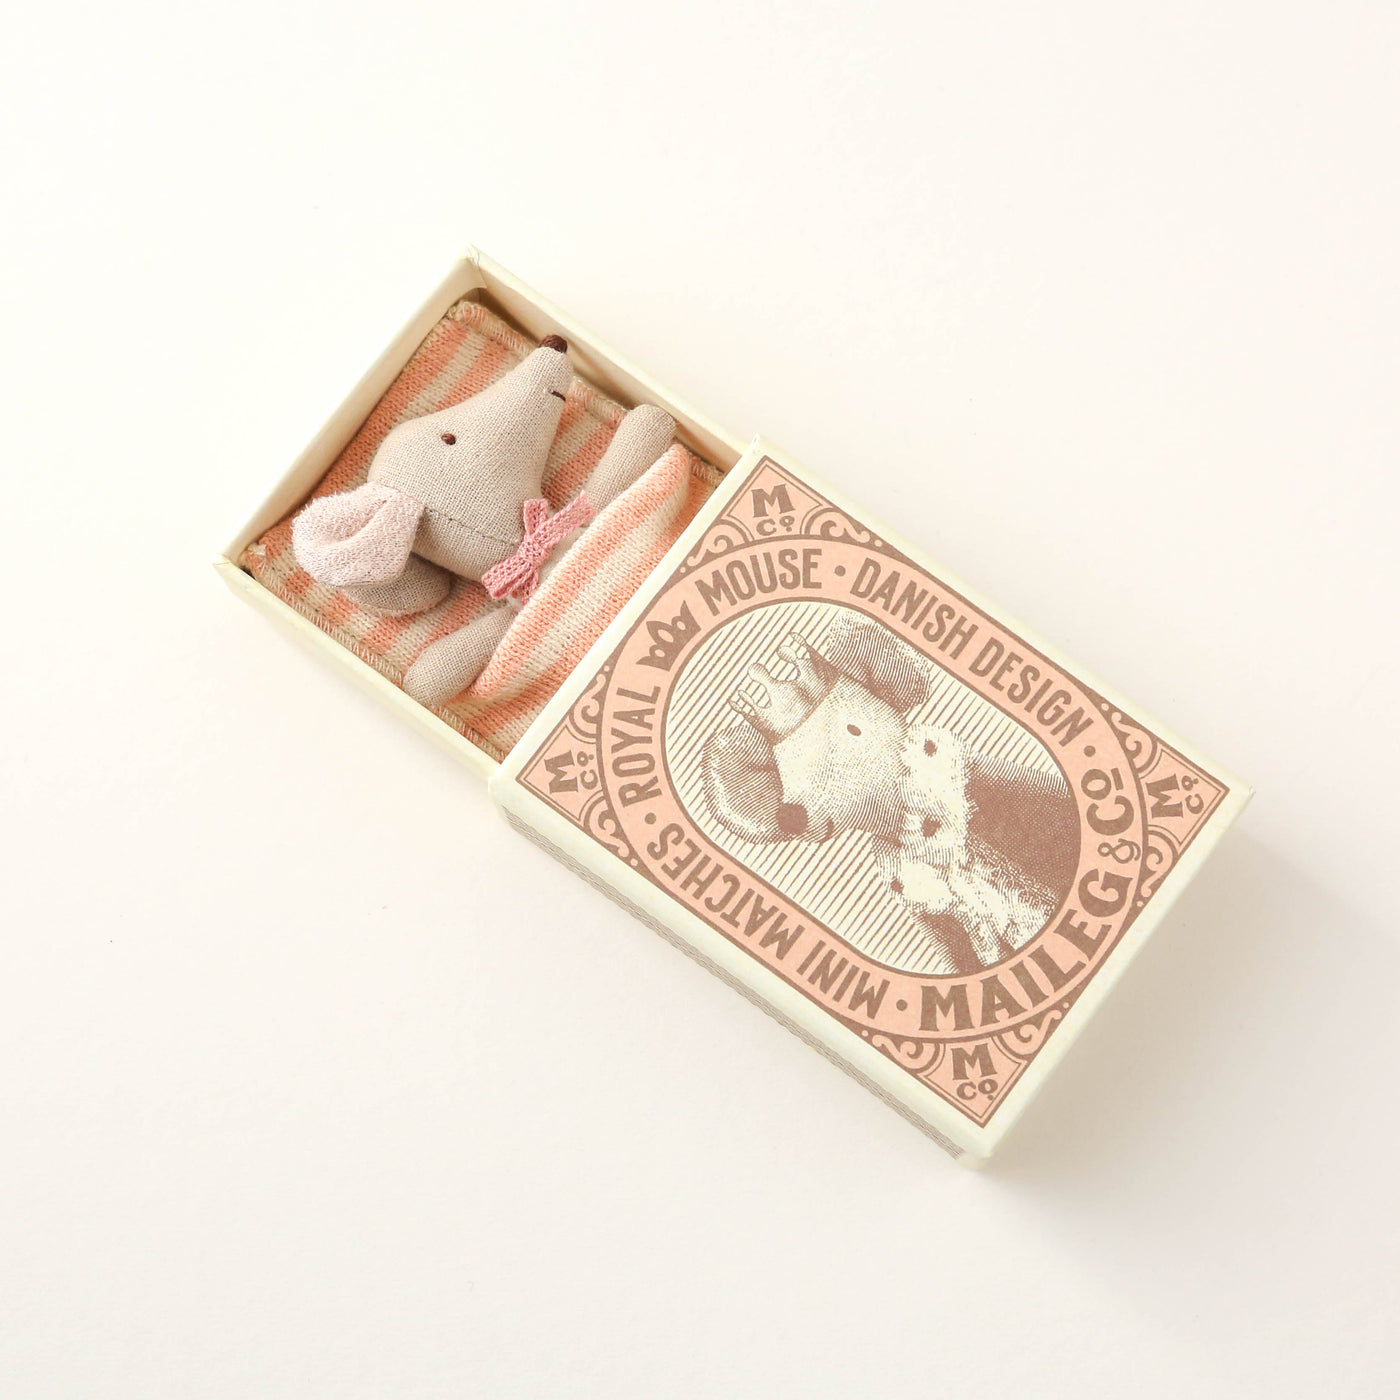 Sleepy / Wakey Baby Mouse Toy in Matchbox - Pink